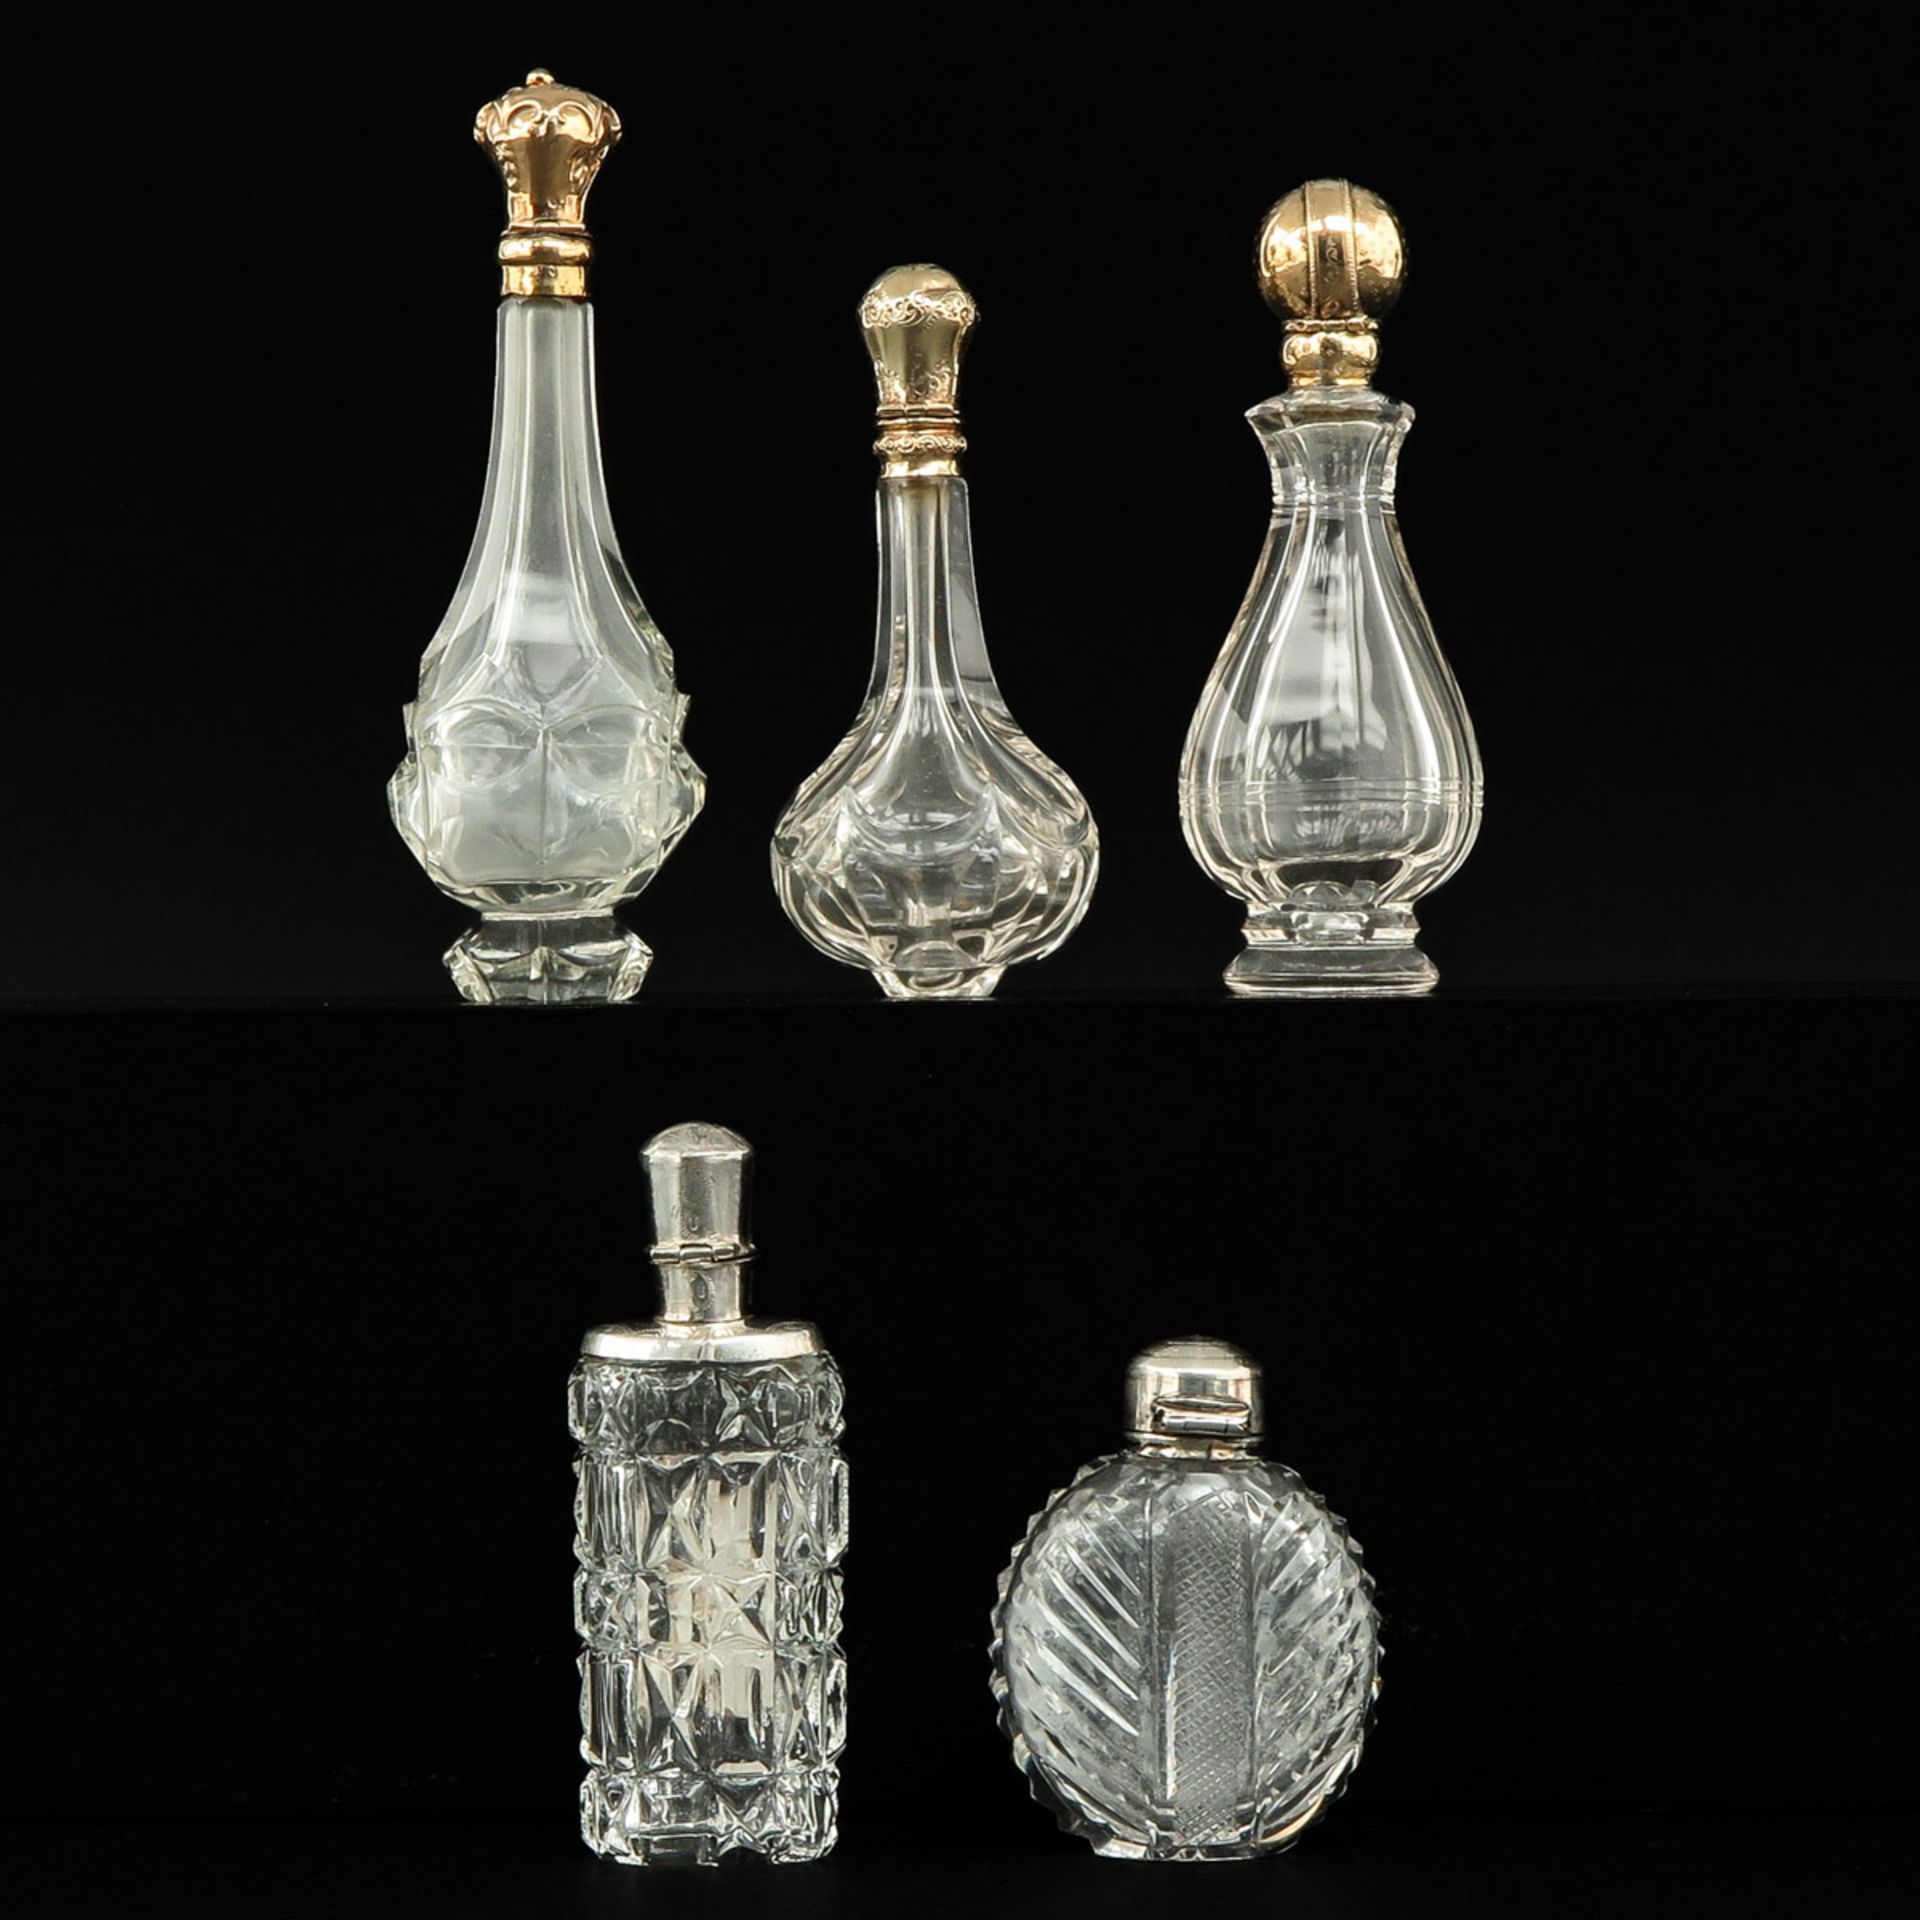 A Collection of 5 Perfume Bottles - Image 3 of 9